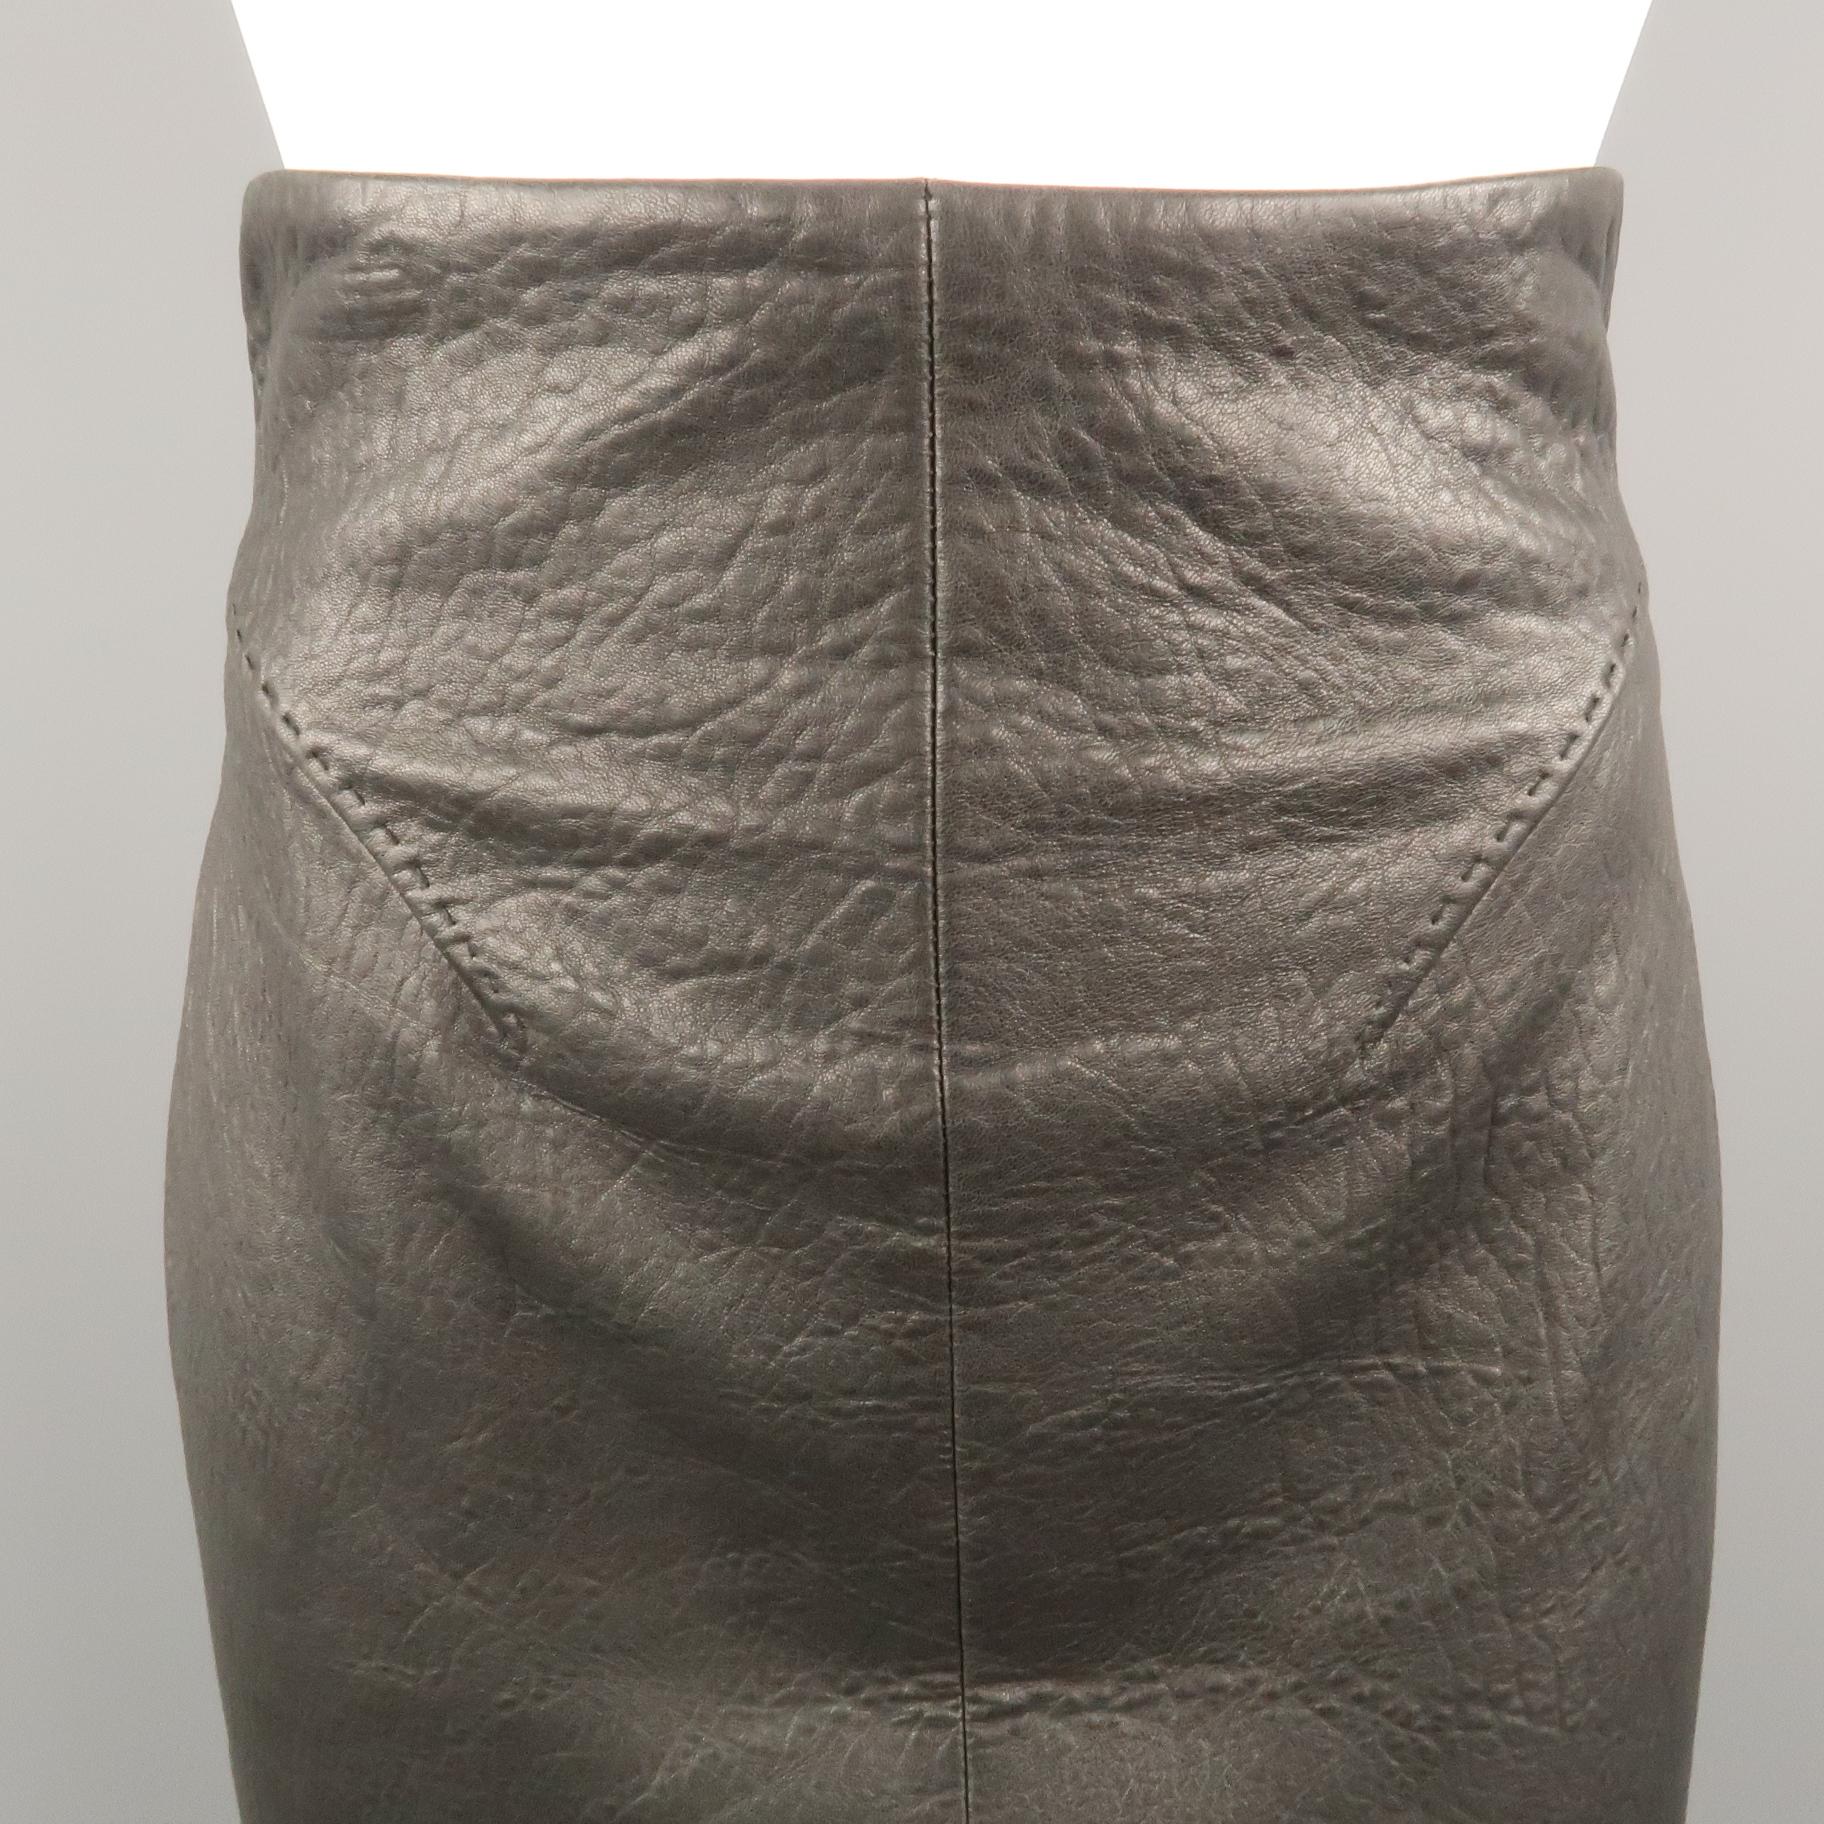 Vintage GIANFRANCO FERRE pencil skirt comes in soft black textured leather with a high rise, darted front, and back cutout with belted waist. Made in Italy.
 
Excellent Pre-Owned Condition.
Marked: IT 40
 
Measurements:
 
Waist: 25 in.
Hip: 36